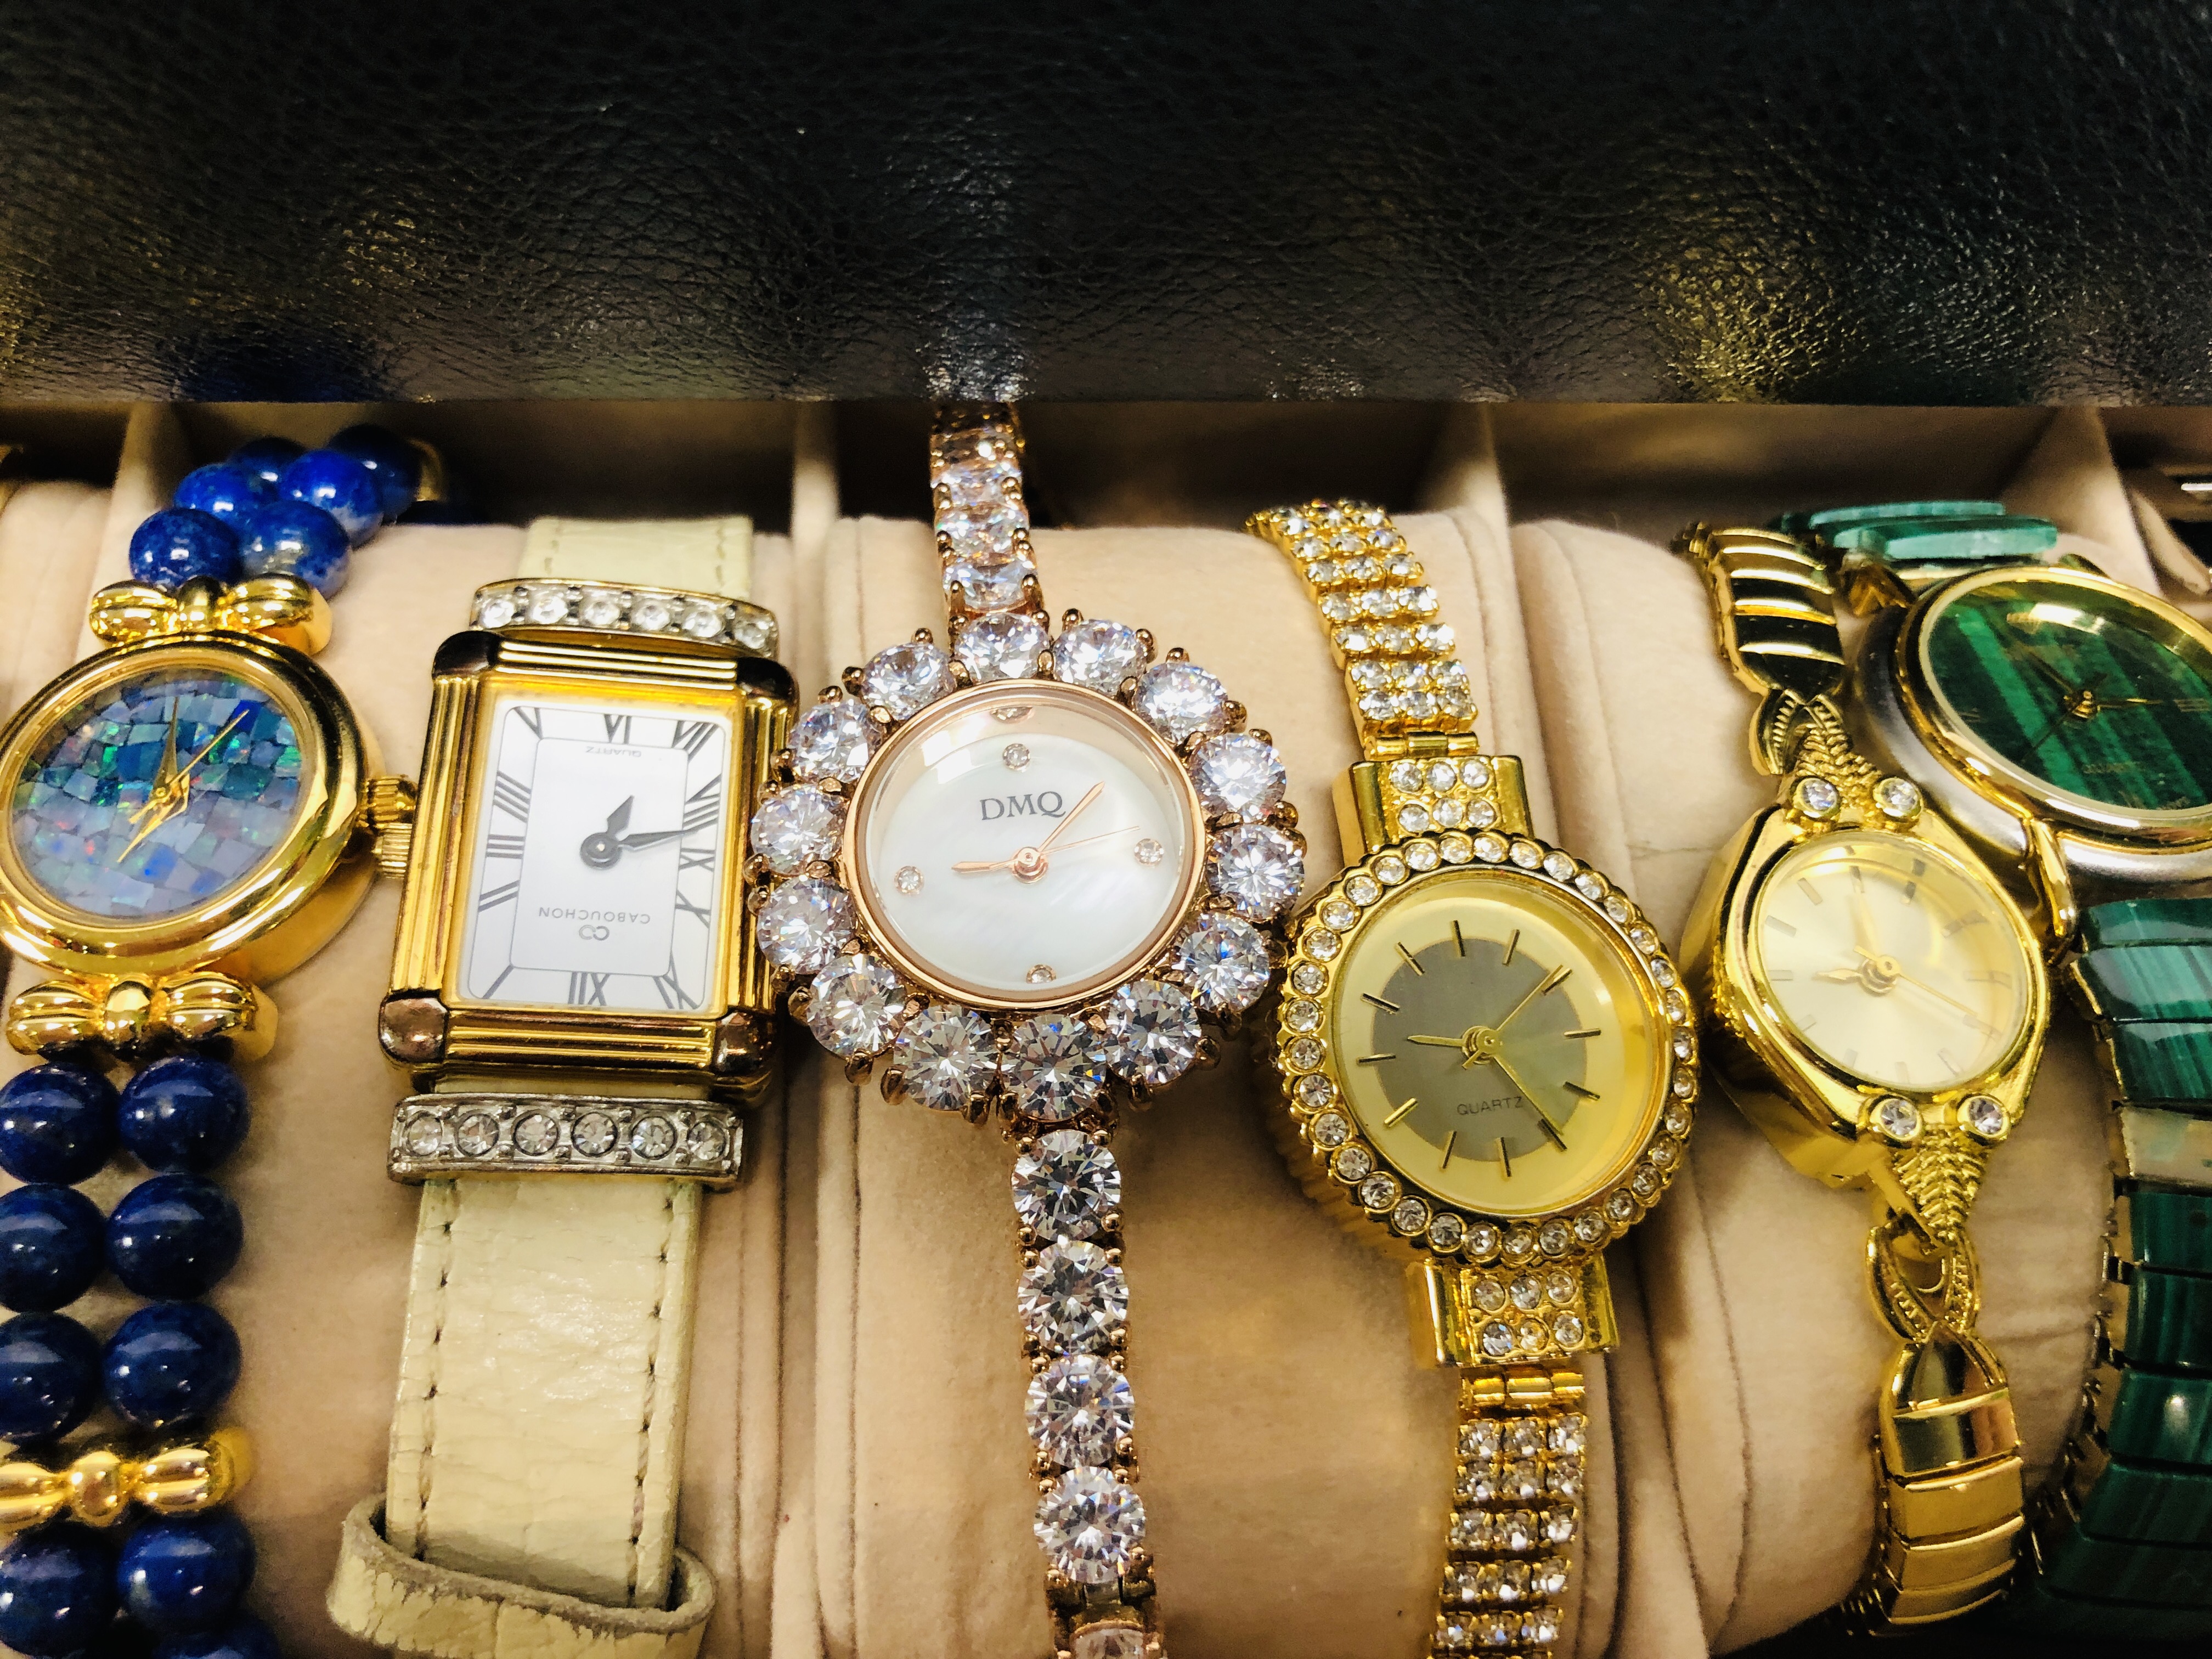 LEATHERETTE WRIST WATCH TREASURY BOX CONTAINING 20 X DESIGNER LADIES WRIST WATCHES OF VARIOUS - Image 6 of 9